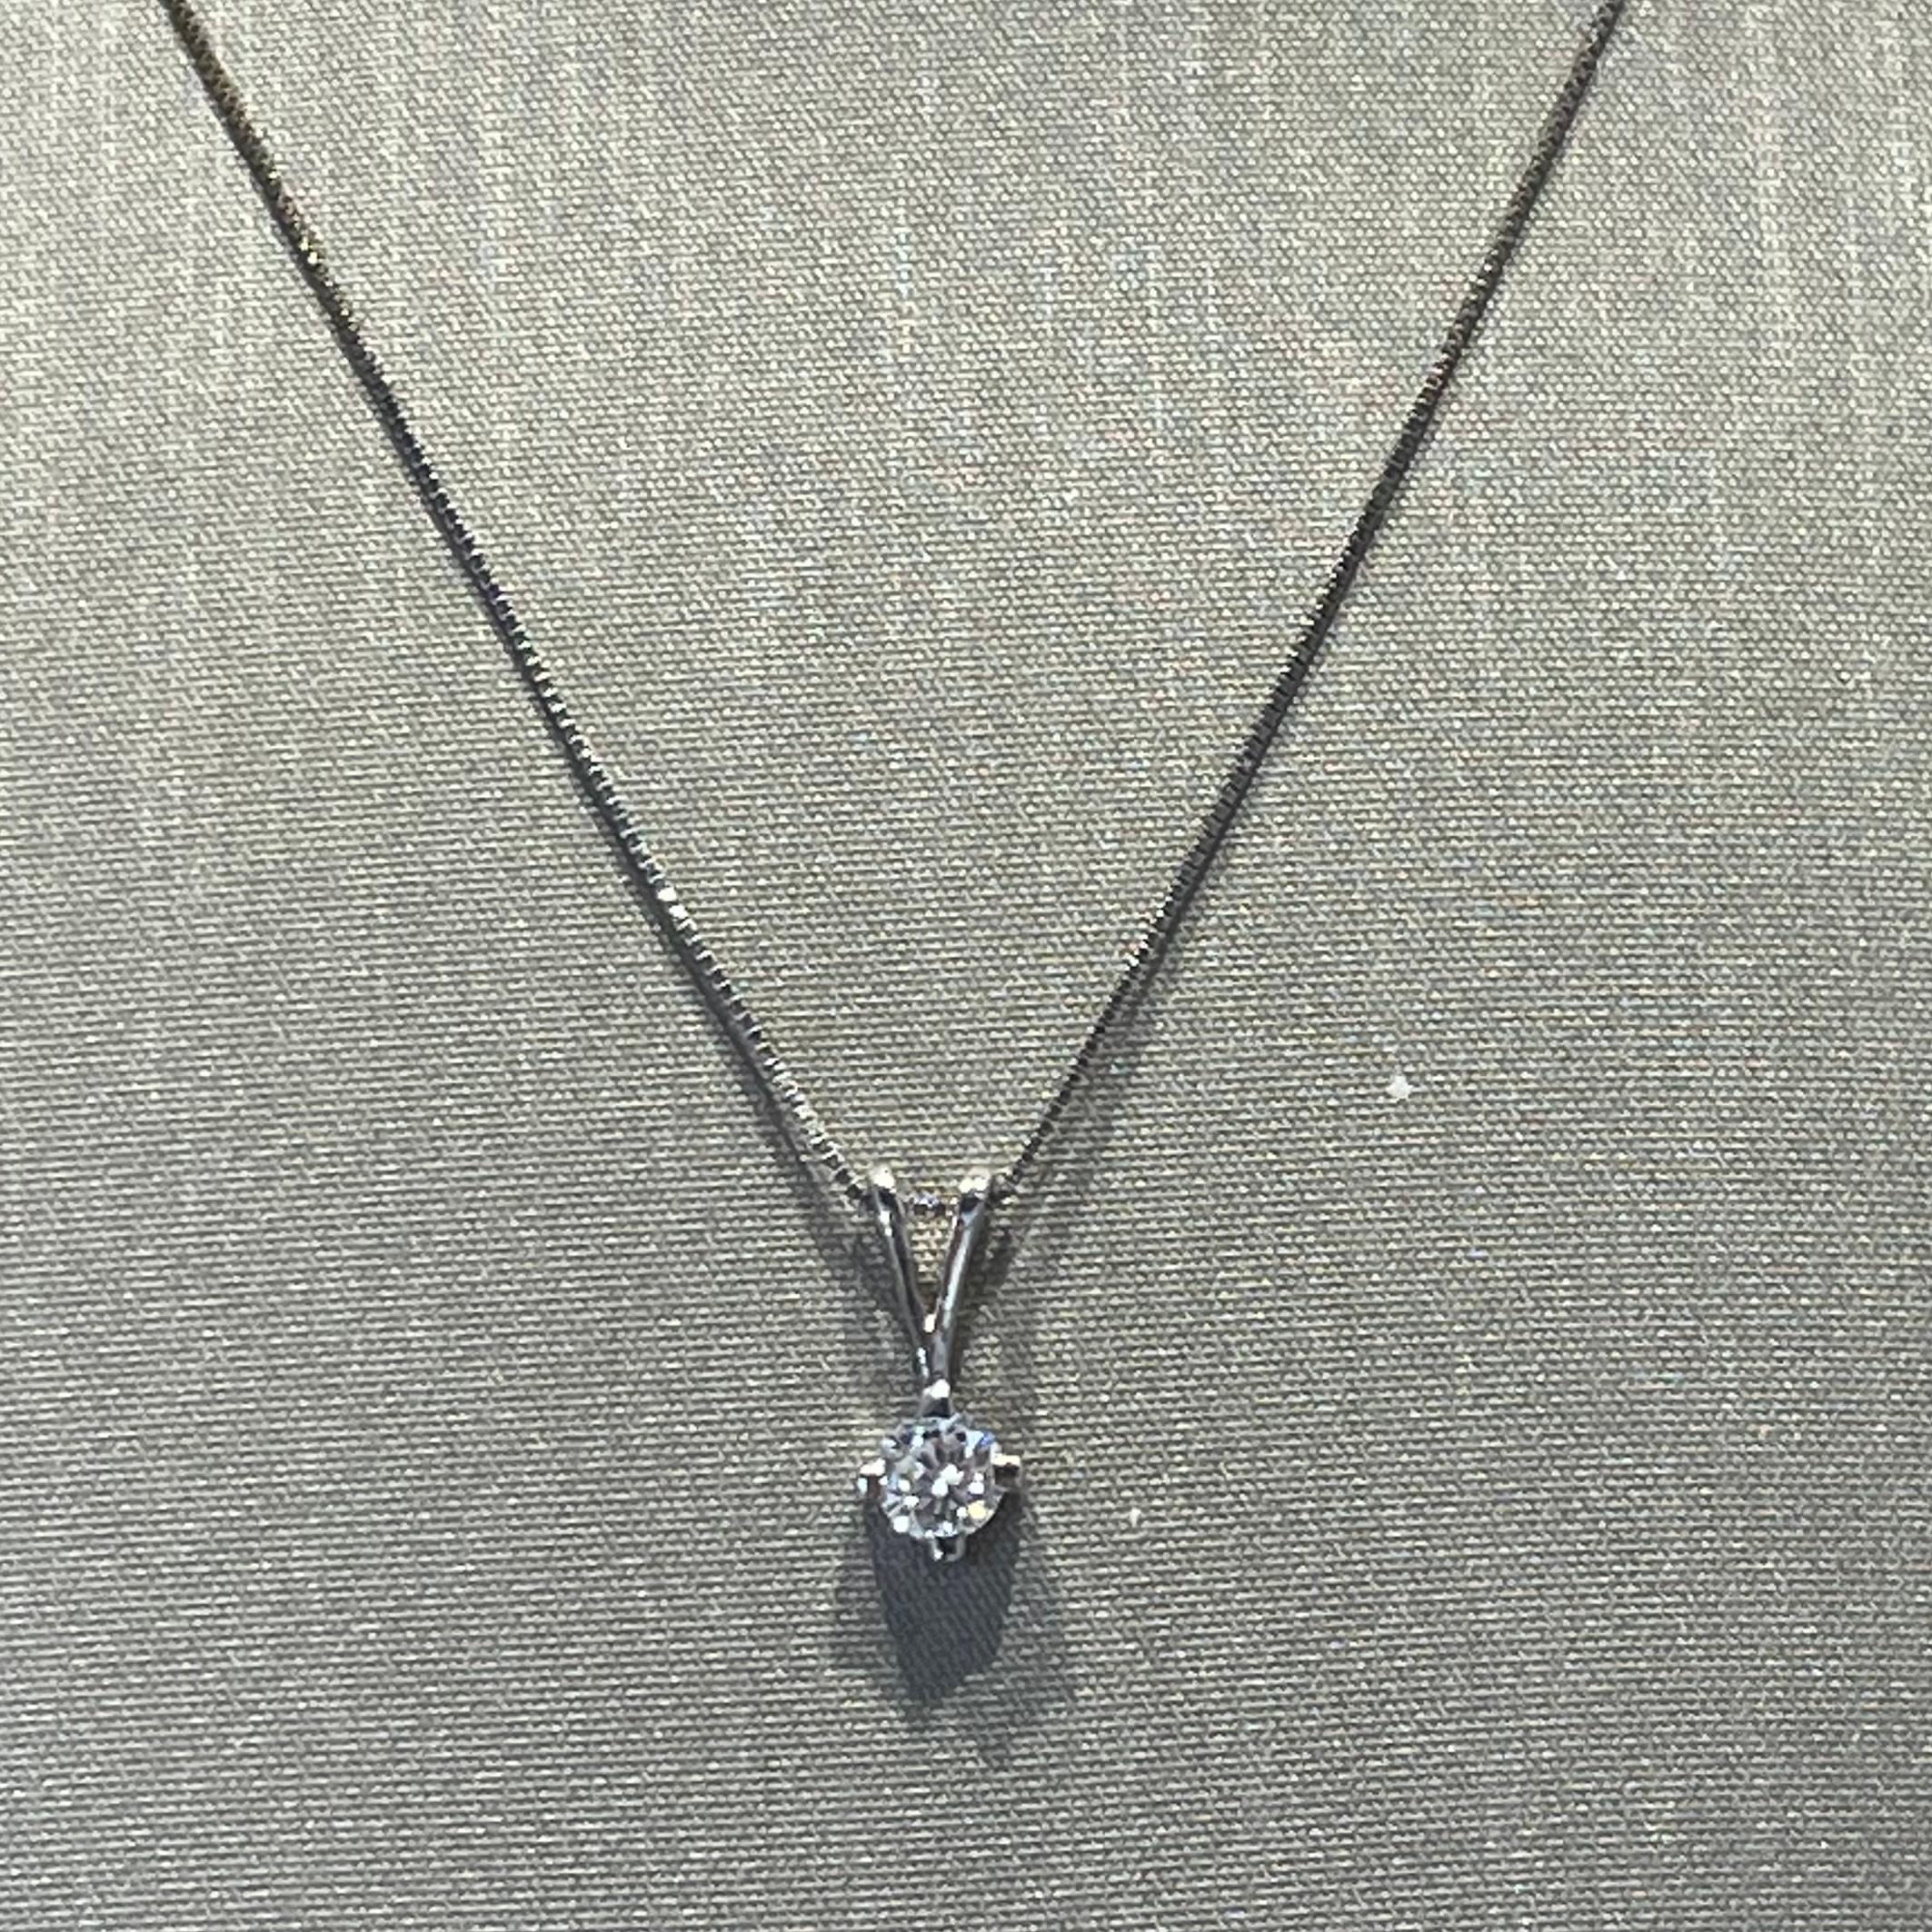 Women's or Men's Solitaire Diamond Pendant Necklace in 14k White Gold For Sale